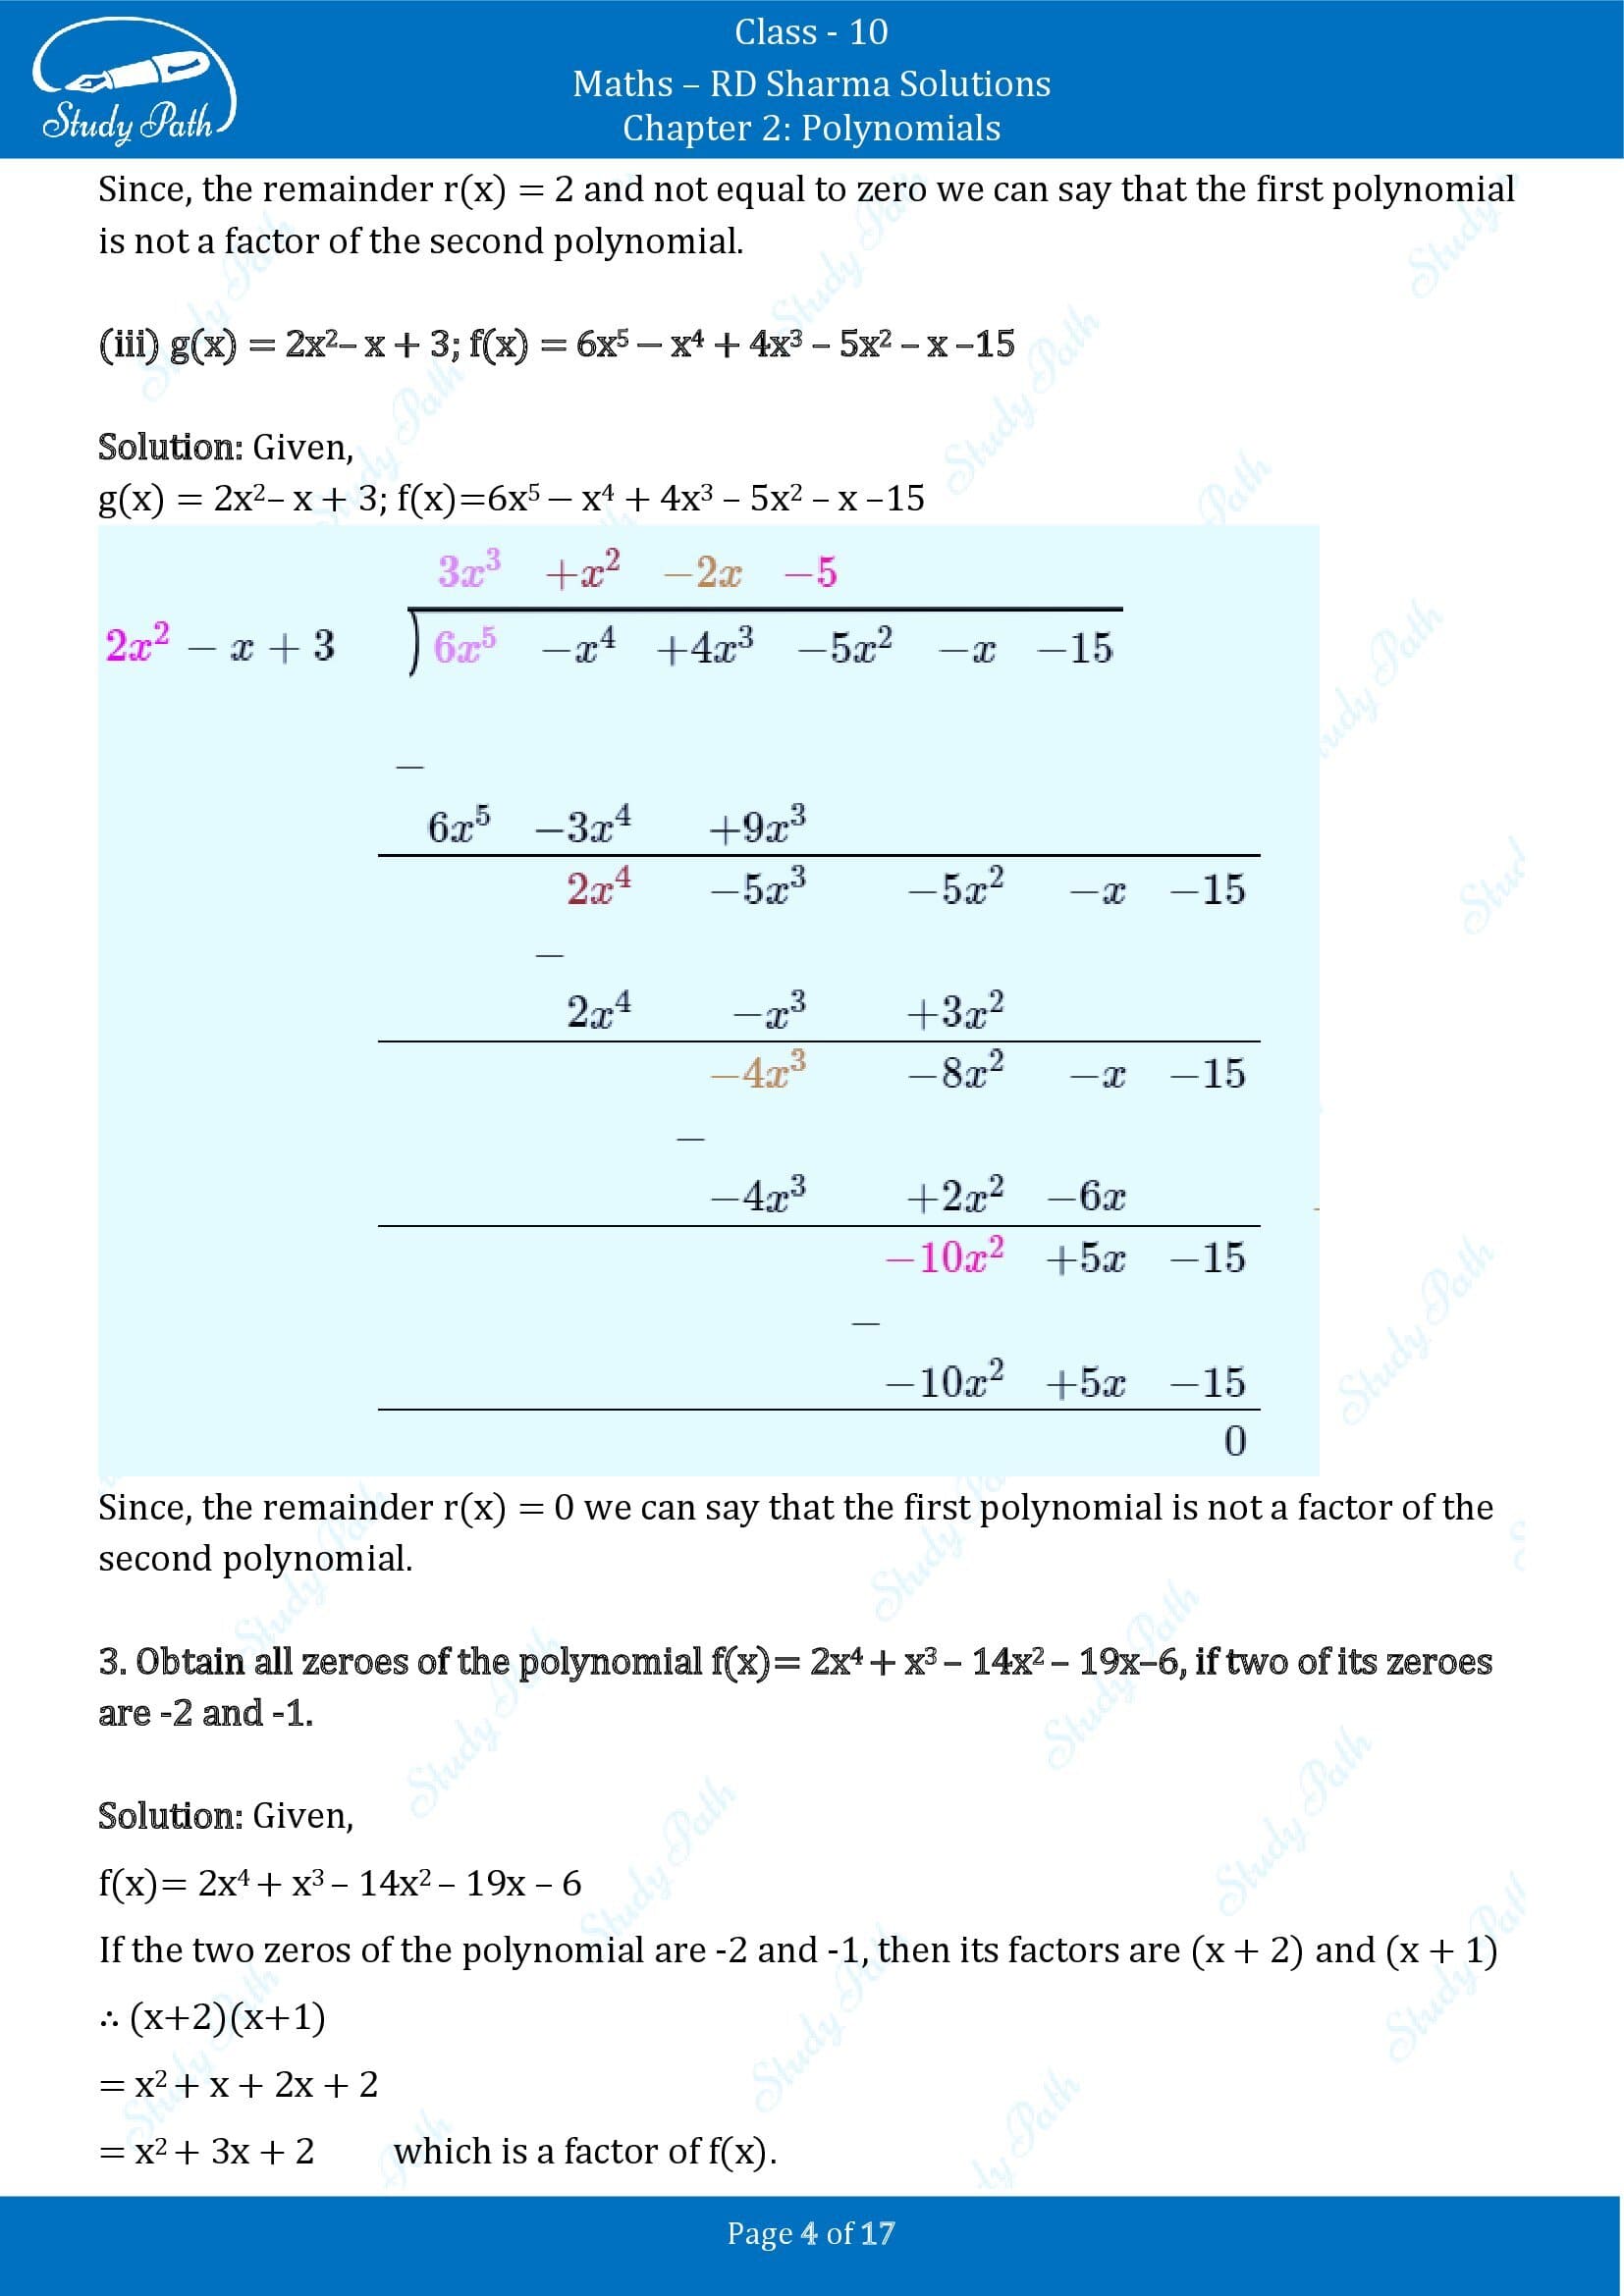 RD Sharma Solutions Class 10 Chapter 2 Polynomials Exercise 2.3 00004